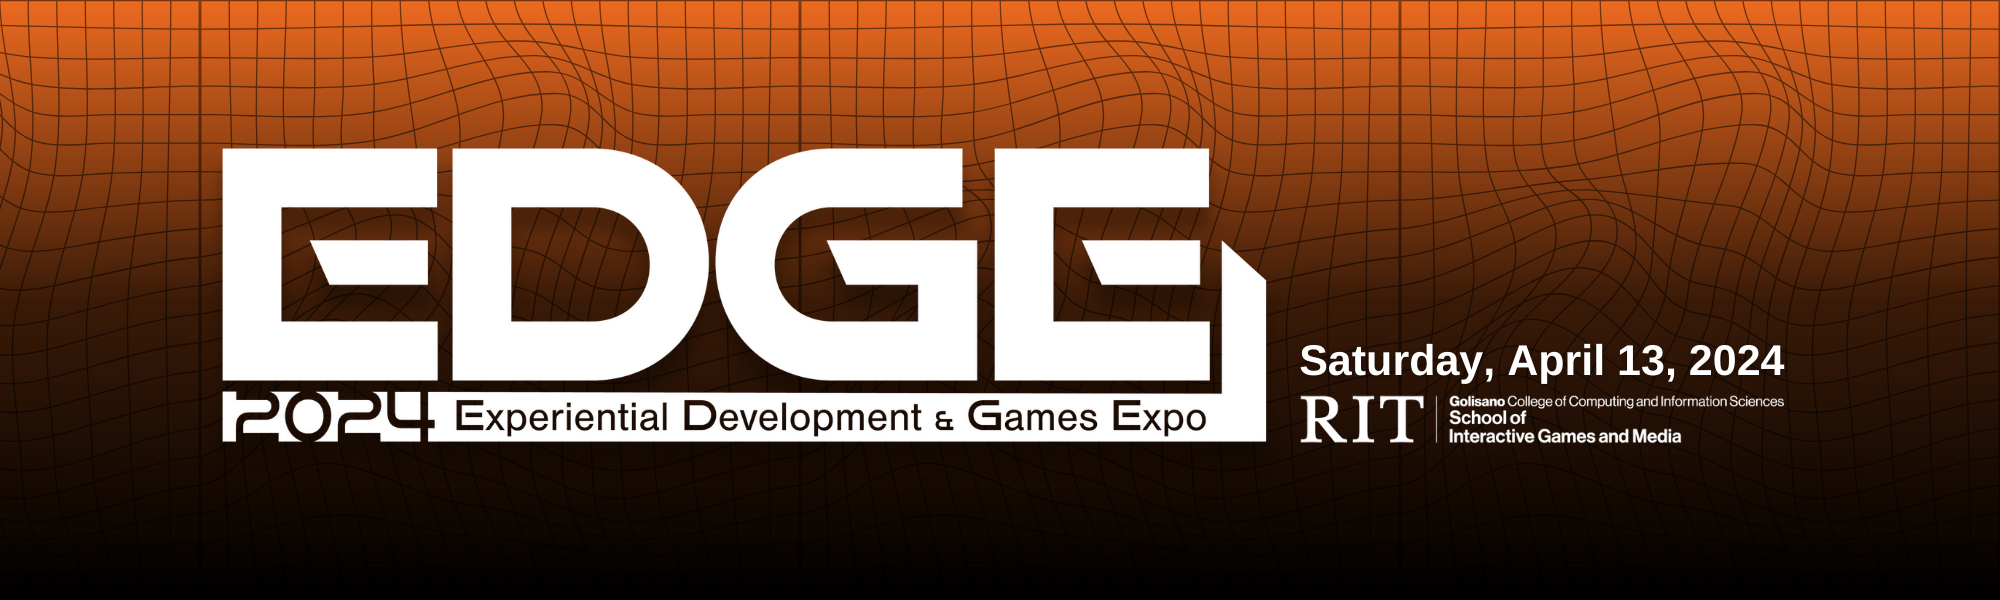 EDGE- Experiential Development & Games Expo Saturday April 13, 2024 presented by the School of IGM